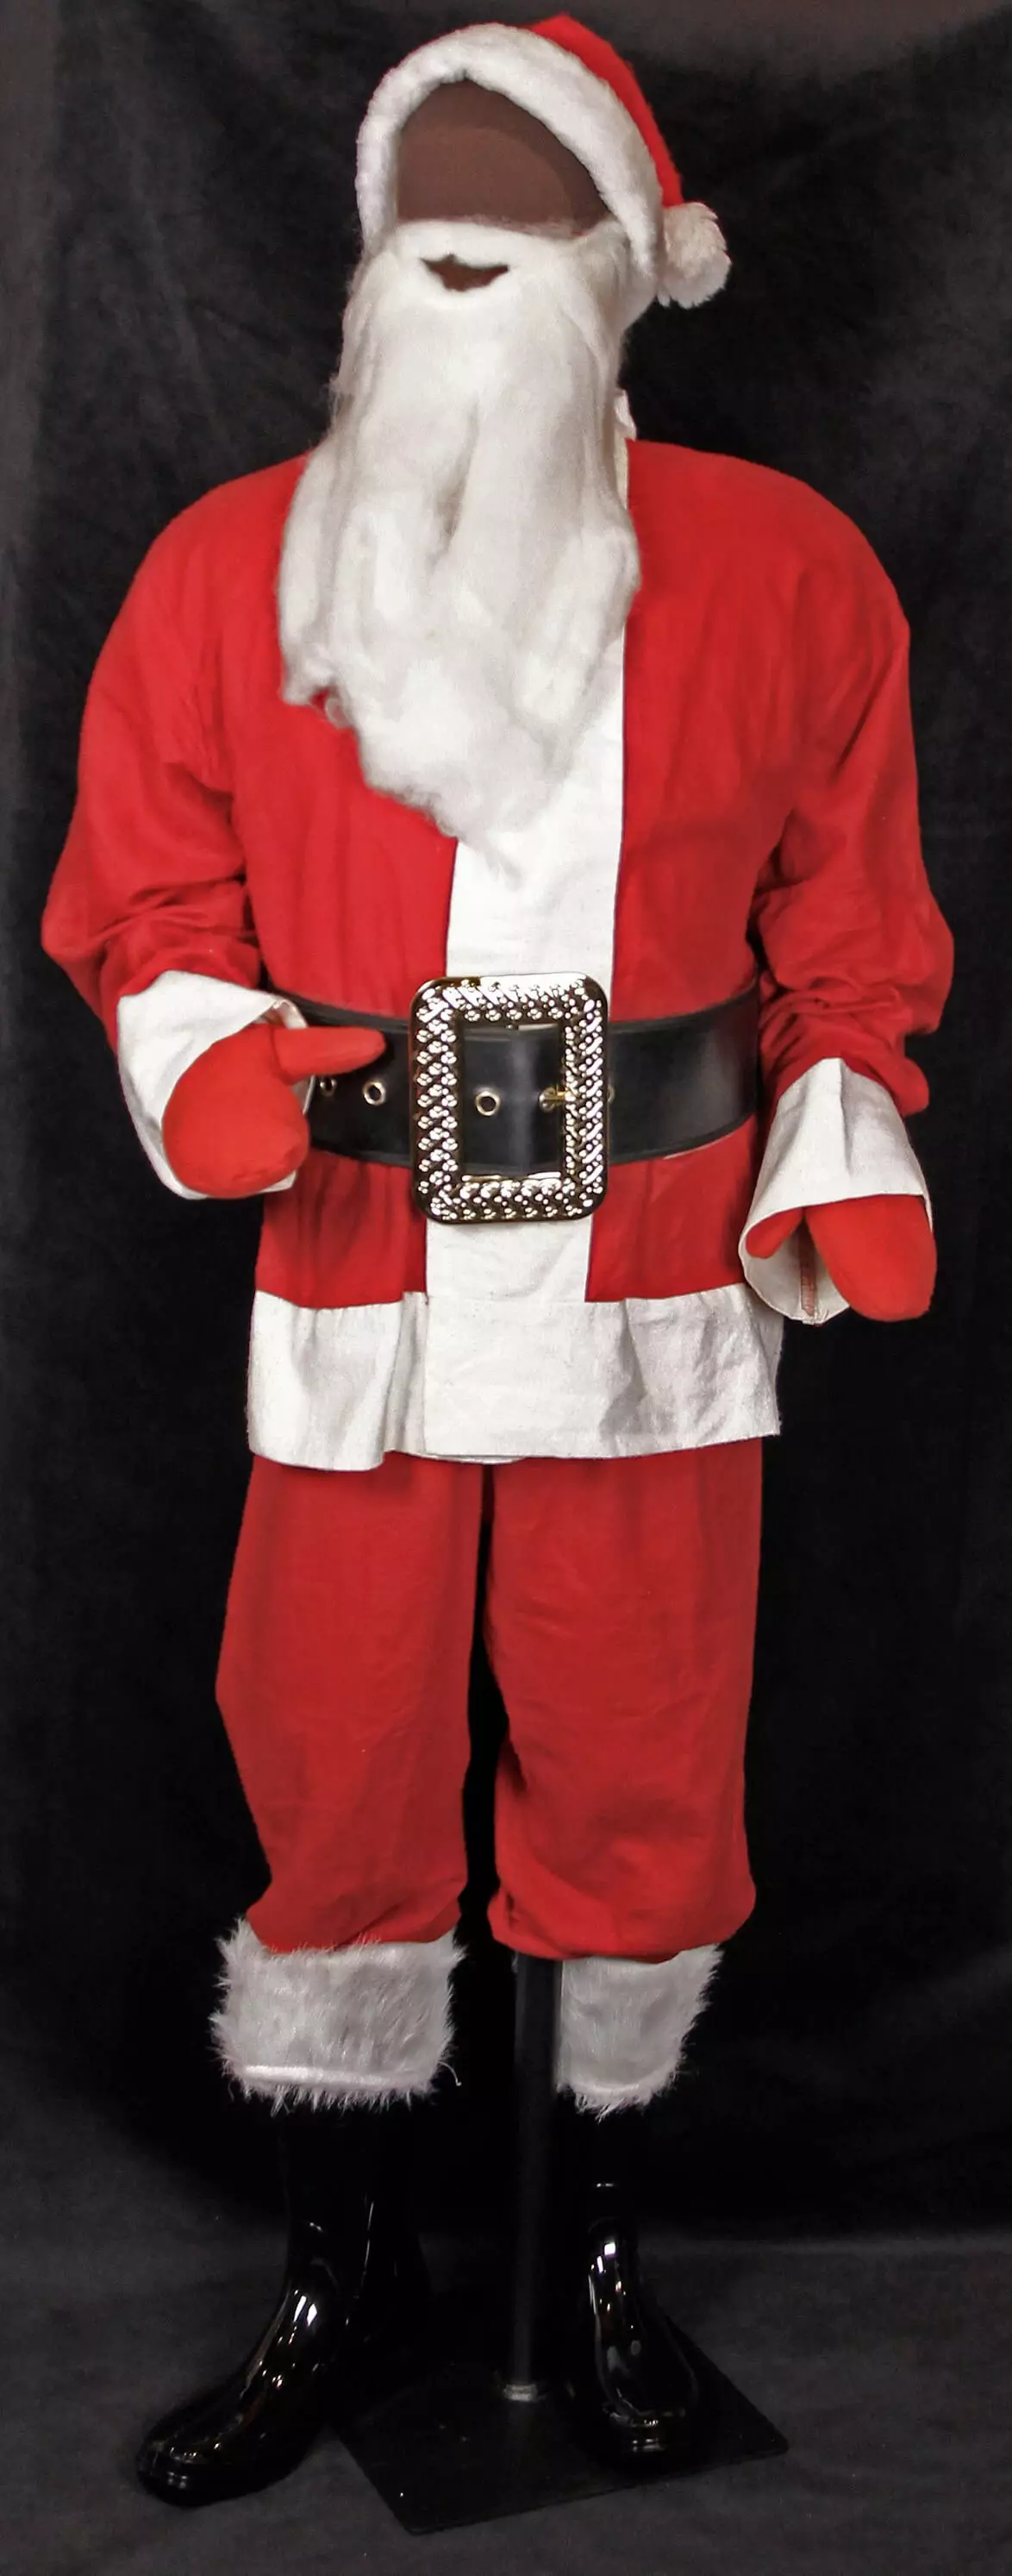 Red and white santa suit with black and gold wide belt and black boots.